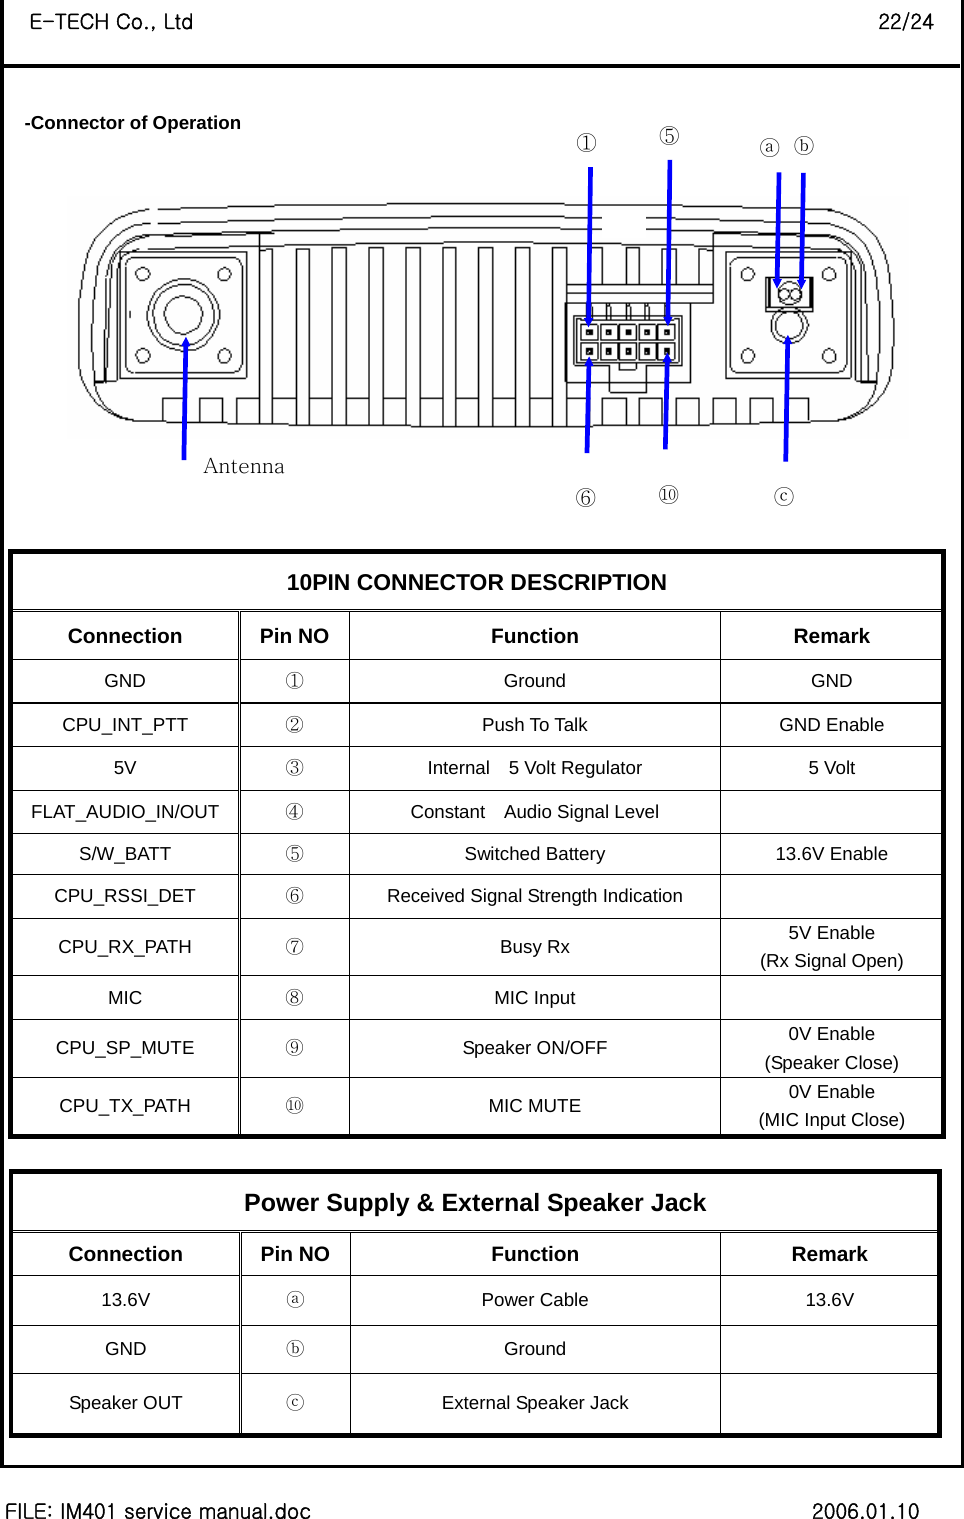 8 FILE: IM401 service manual.doc                                                 2006.01.10 E-TECH Co., Ltd                                                                   22/24  -Connector of Operation        Power Supply &amp; External Speaker Jack Connection Pin NO  Function  Remark 13.6V  ⓐ Power Cable  13.6V GND  ⓑ Ground   Speaker OUT  ⓒ  External Speaker Jack    10PIN CONNECTOR DESCRIPTION Connection Pin NO  Function  Remark GND  ① Ground  GND CPU_INT_PTT  ②  Push To Talk  GND Enable 5V  ③  Internal    5 Volt Regulator  5 Volt FLAT_AUDIO_IN/OUT  ④  Constant    Audio Signal Level   S/W_BATT  ⑤  Switched Battery  13.6V Enable CPU_RSSI_DET  ⑥  Received Signal Strength Indication   CPU_RX_PATH  ⑦ Busy Rx  5V Enable (Rx Signal Open) MIC  ⑧ MIC Input   CPU_SP_MUTE  ⑨ Speaker ON/OFF  0V Enable (Speaker Close) CPU_TX_PATH  ⑩ MIC MUTE  0V Enable (MIC Input Close) ⑤Antenna ⑥①ⓐ ⑩ⓑ ⓒ